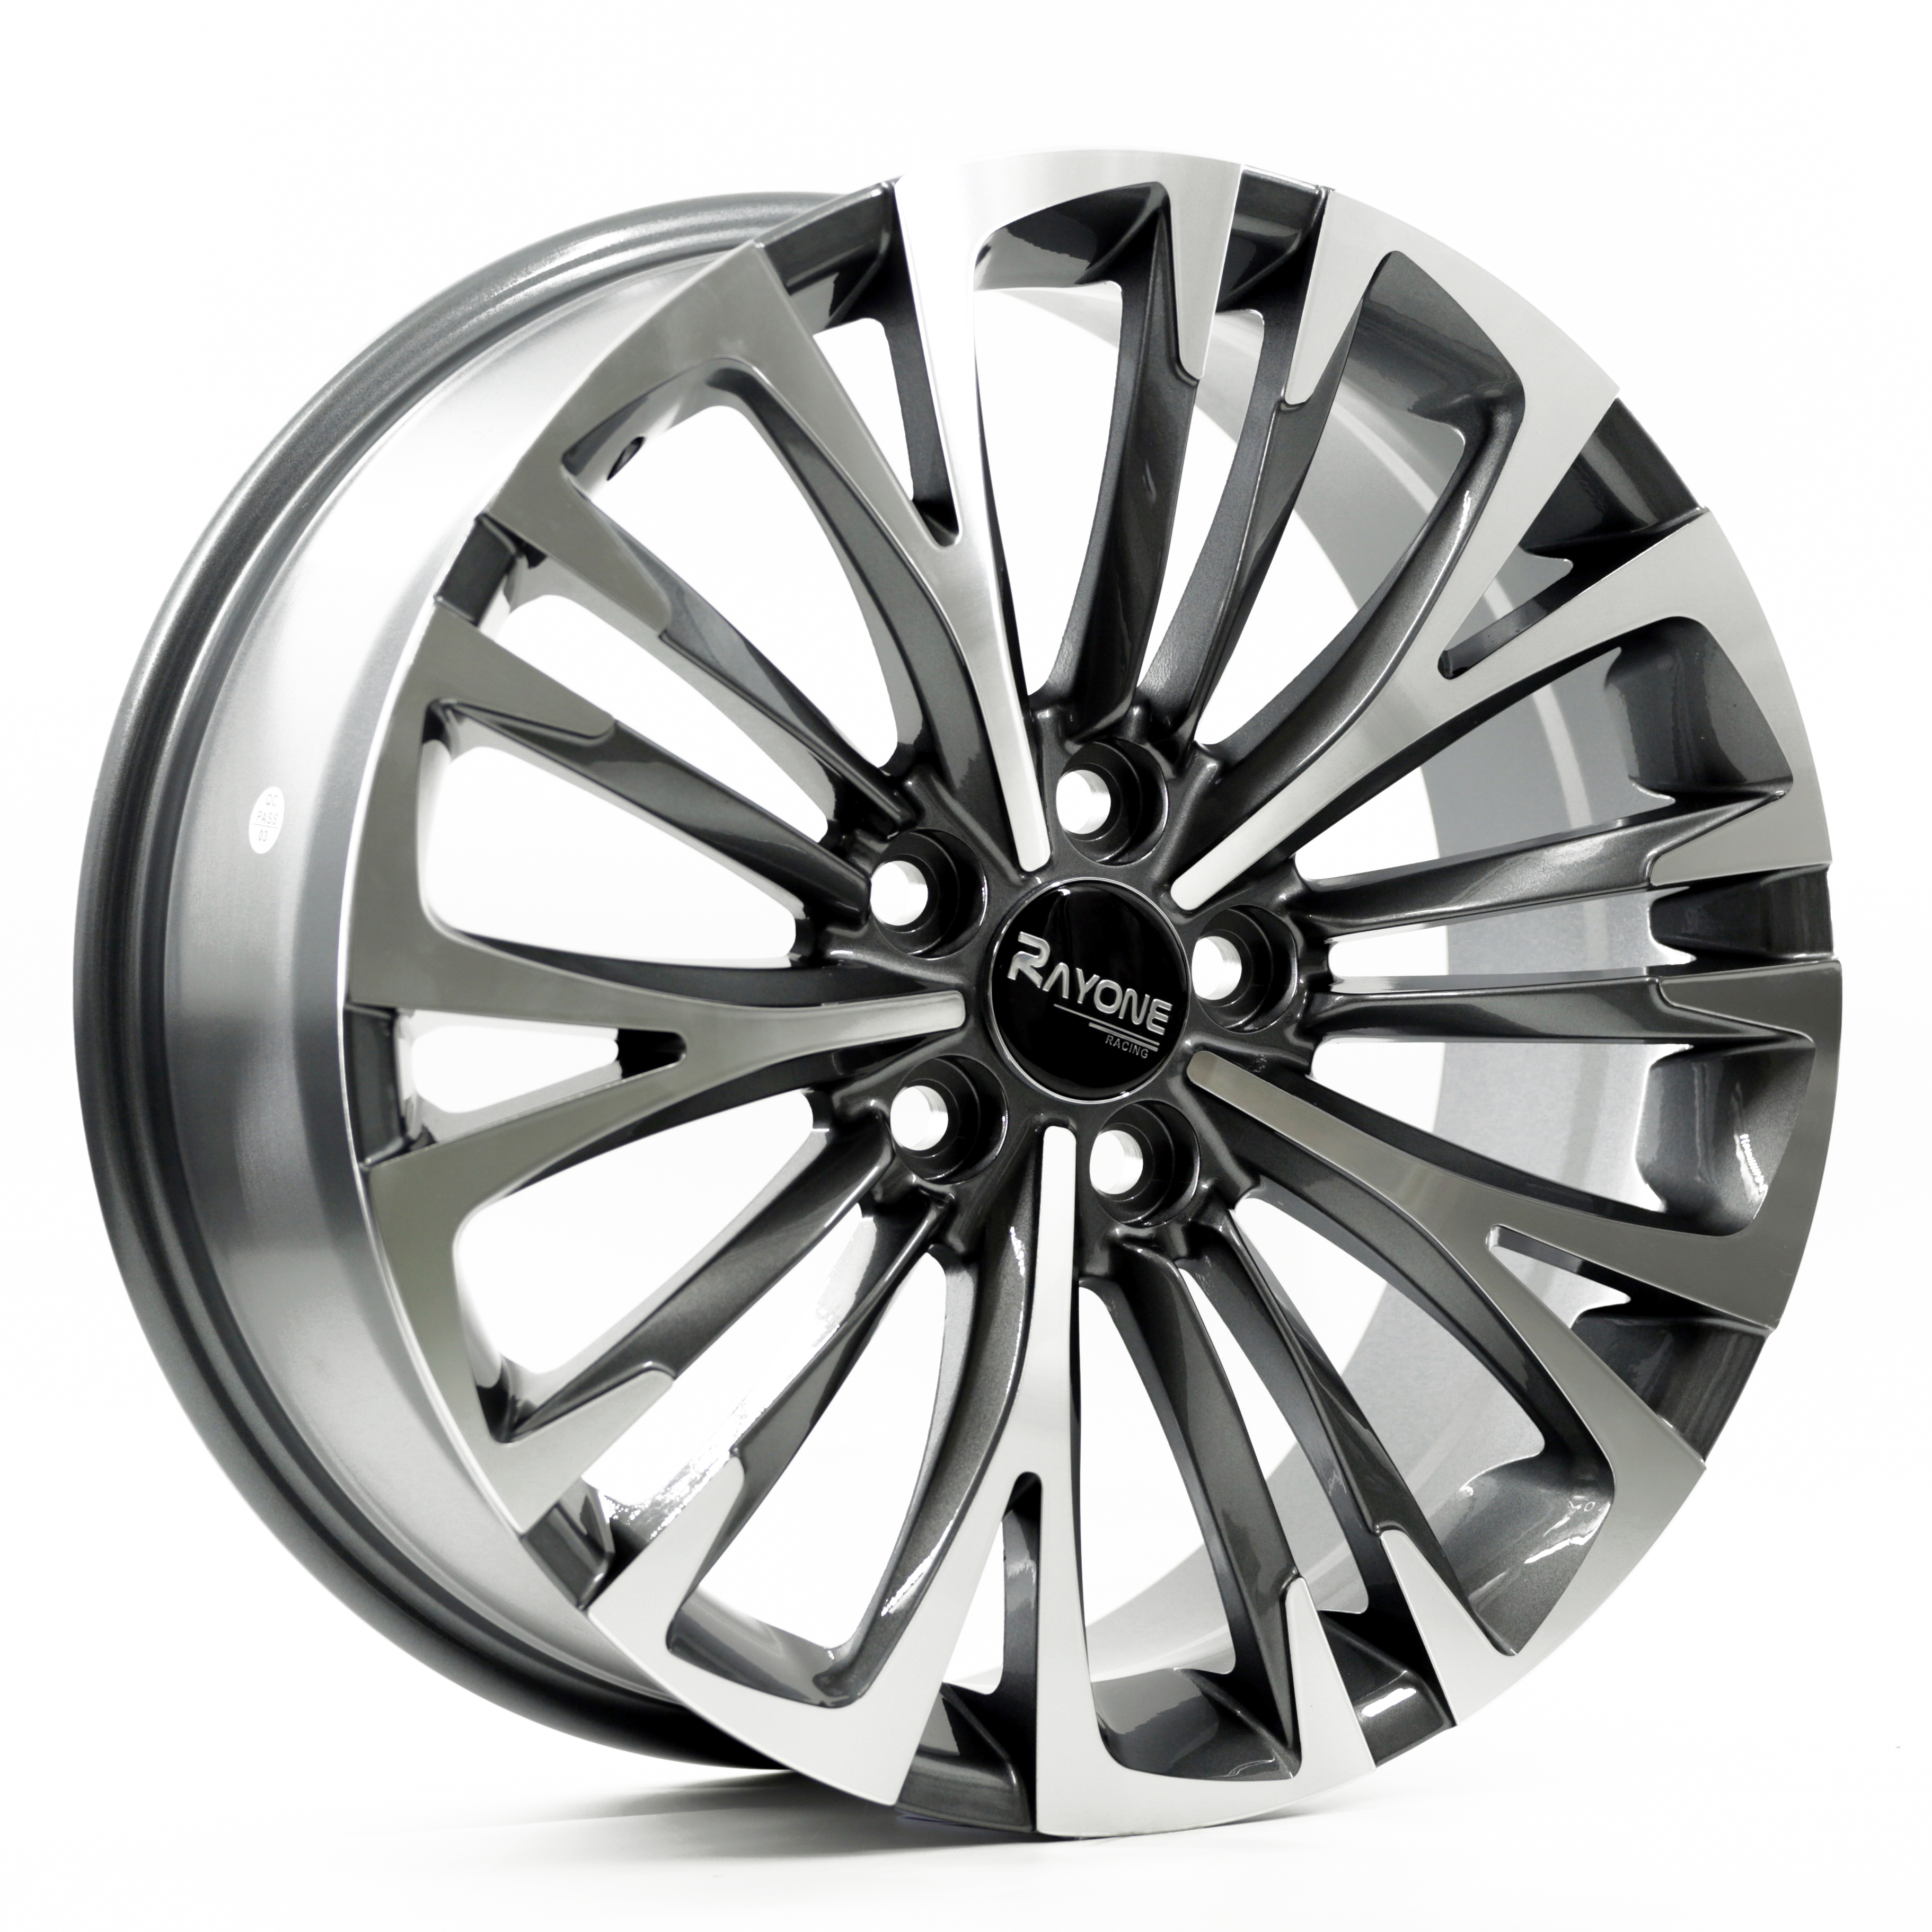 Hight Performance Alloy Wheels 18inch for Toyota